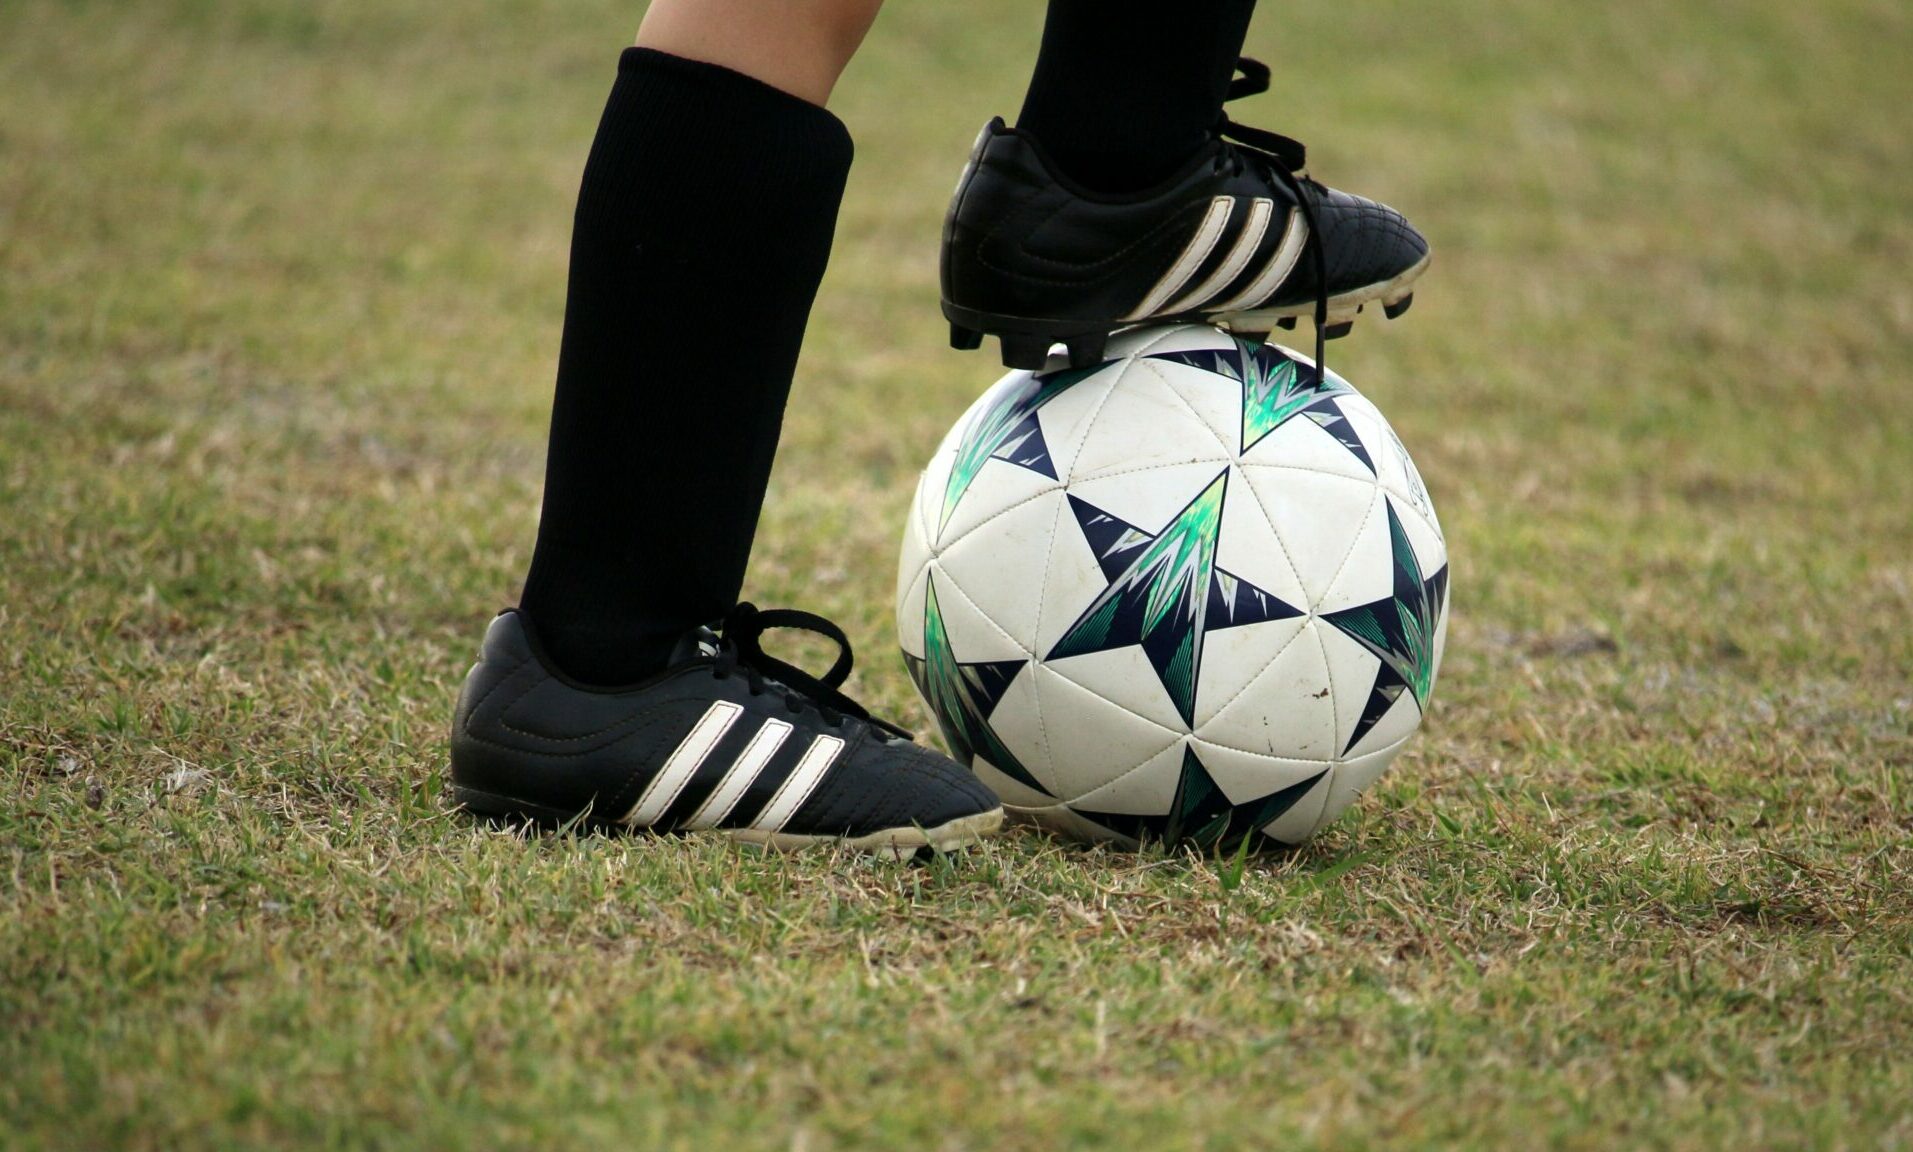 best soccer cleats for kids